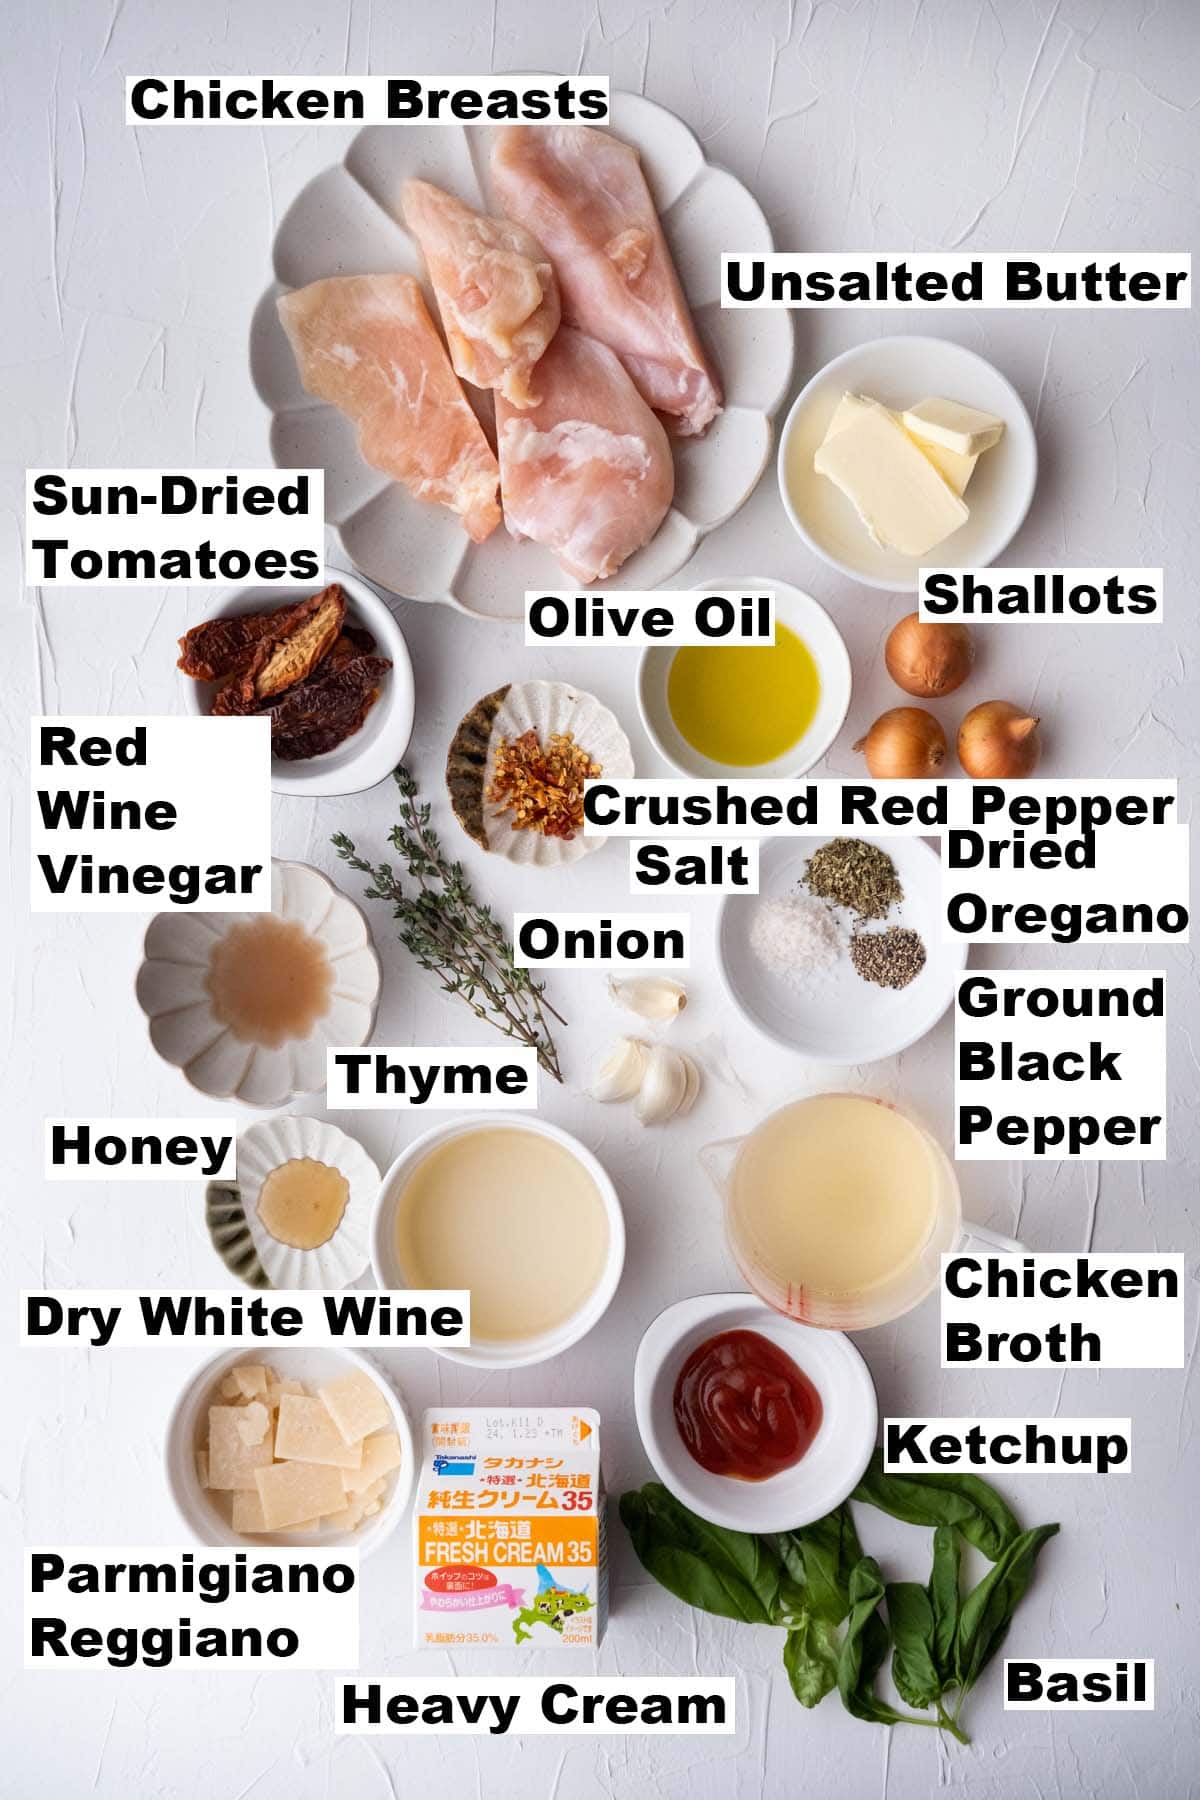 The picture shows all ingredients for Marry Me Chicken recipe.